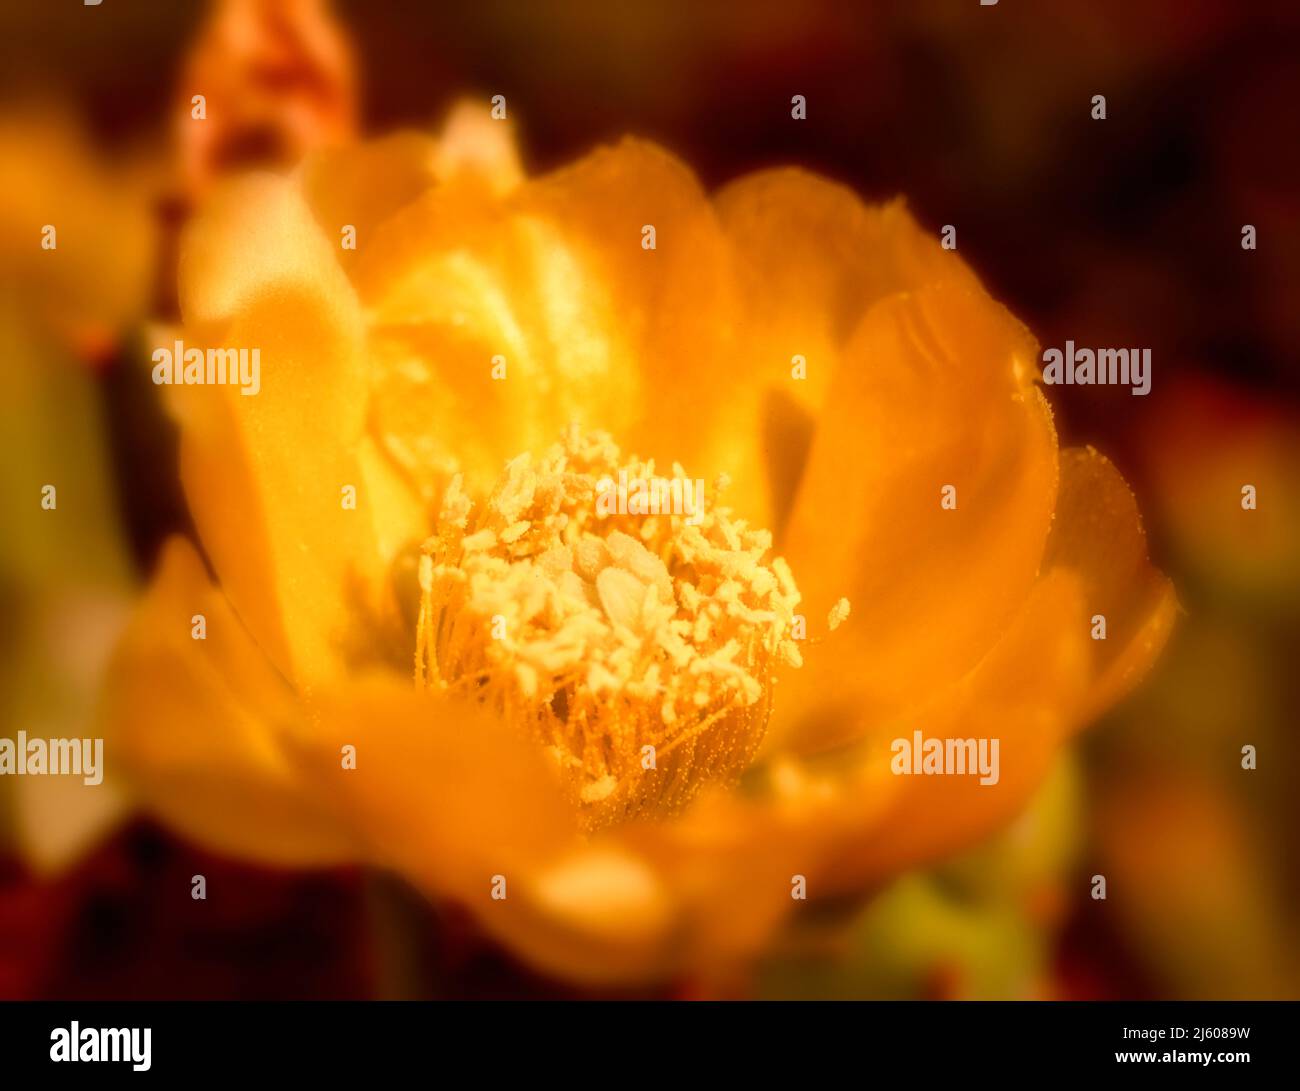 Surprising yellow prickly pear cactus flower in close-up, natural plant portrait Stock Photo